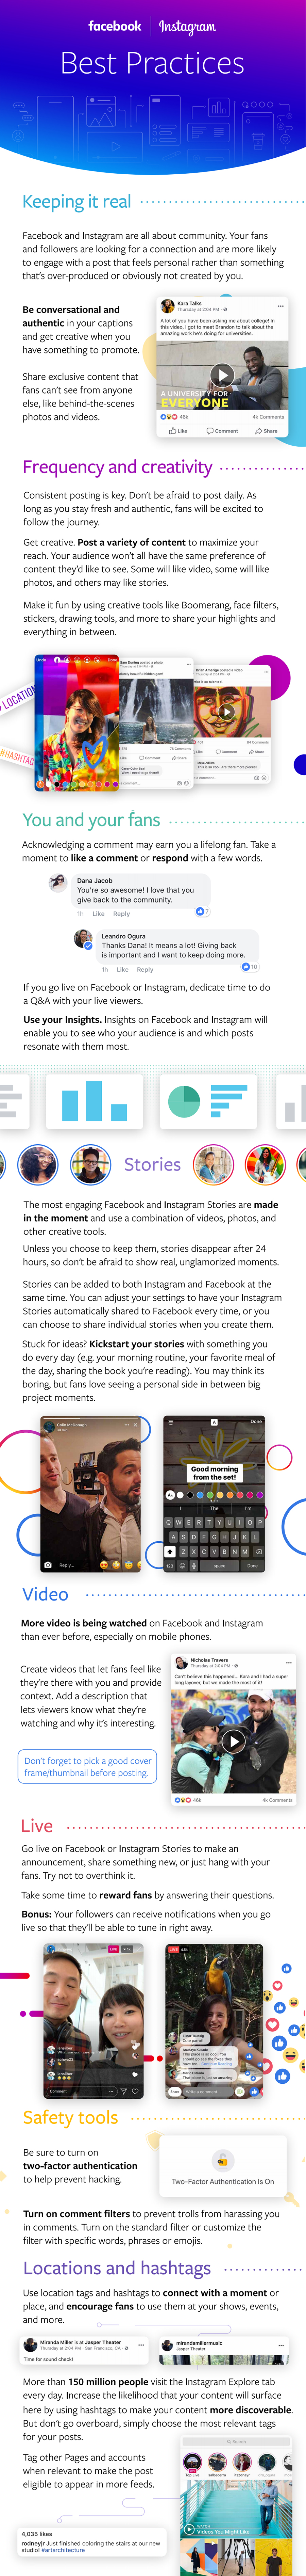 8 Best Practices For Facebook and Instagram Success